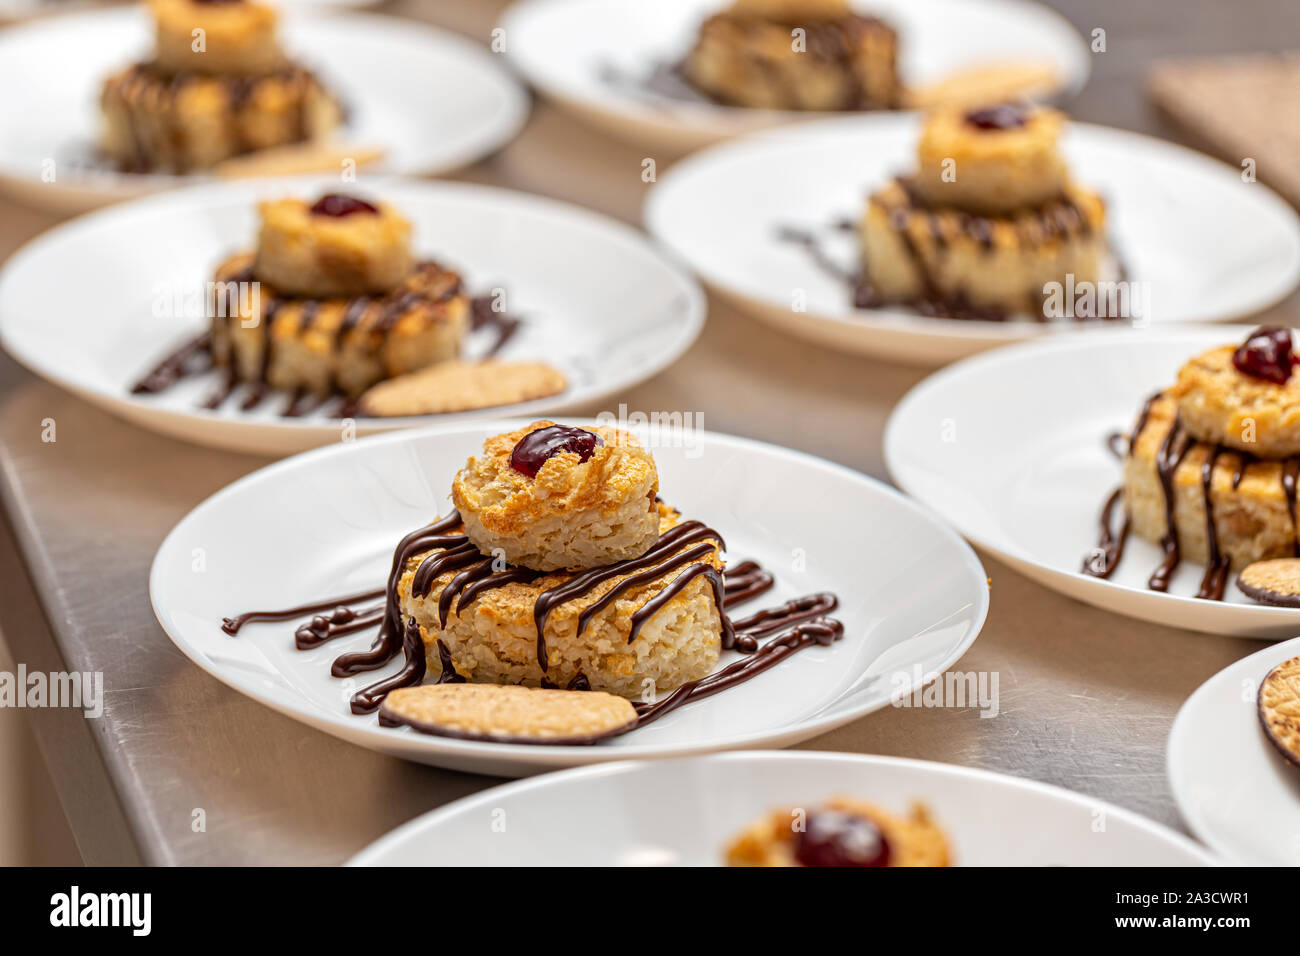 Healthy rice dessert decorated with chocolate sauce Stock Photo